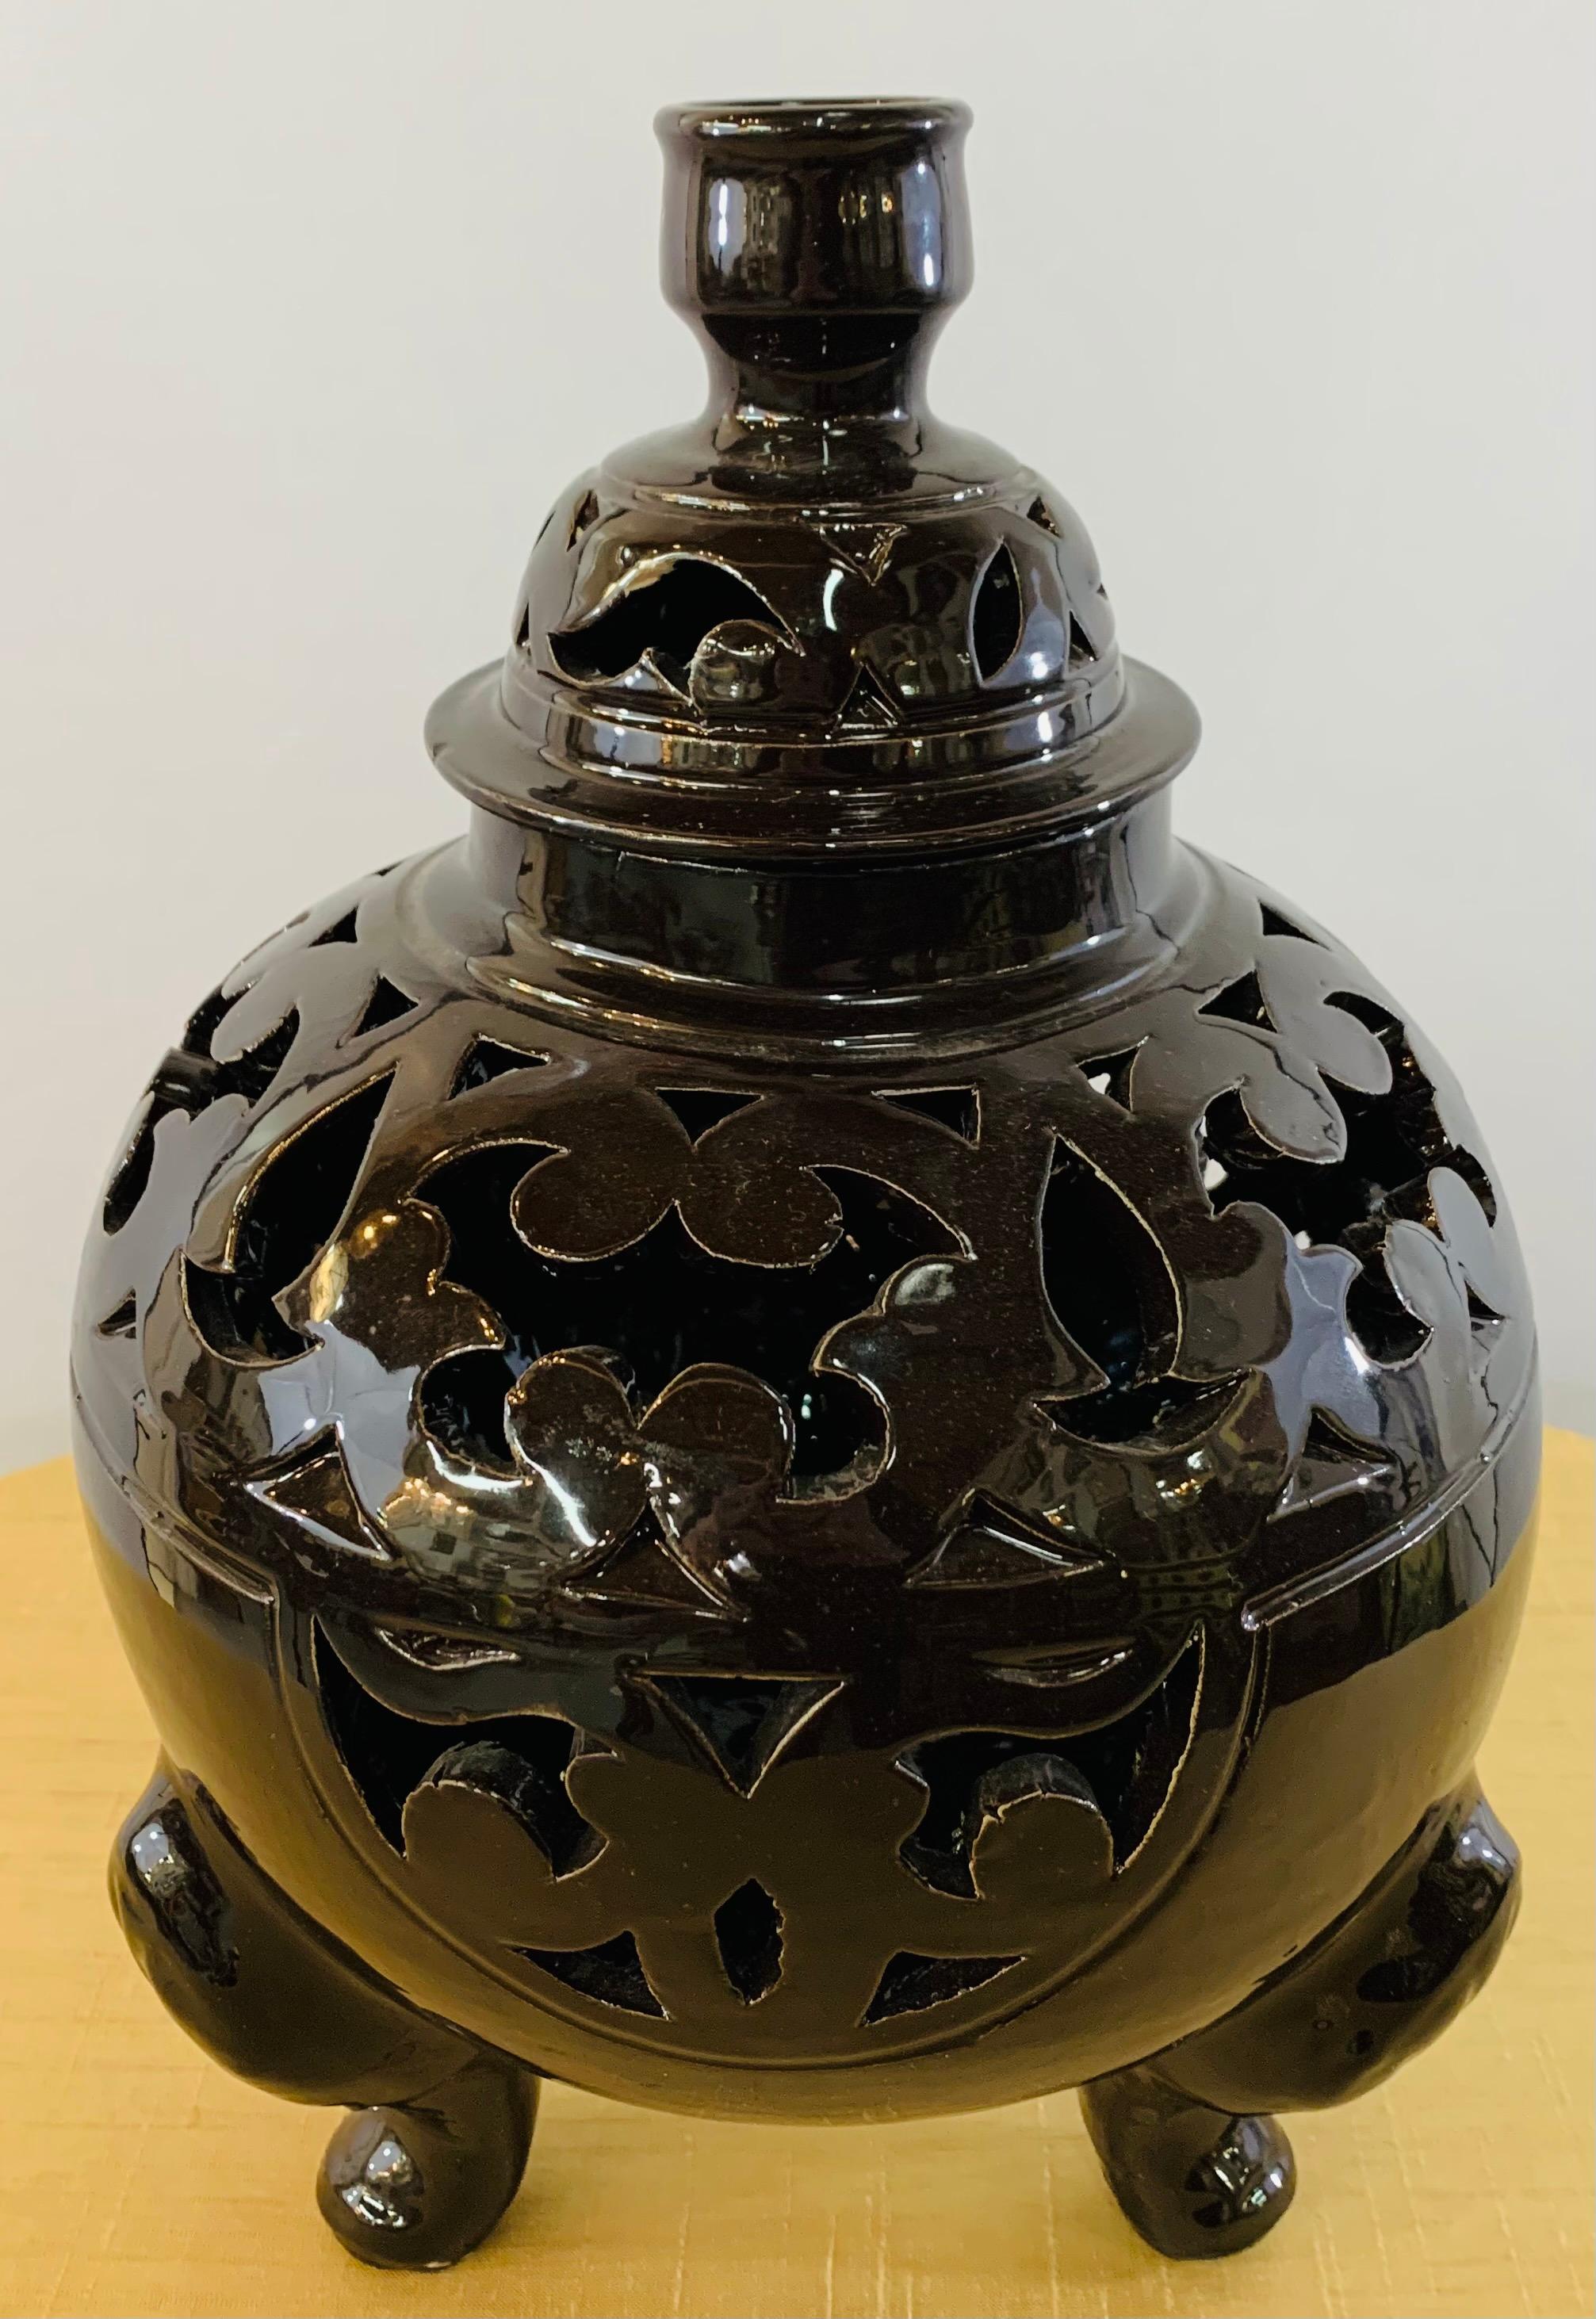 These stylish and one of a kind tri-pod leg fire engine red and ebonized black lidded urns are handmade and are an exquisite piece of pottery to decorate any space and bring style to your living space. These urns can be wired and used as table